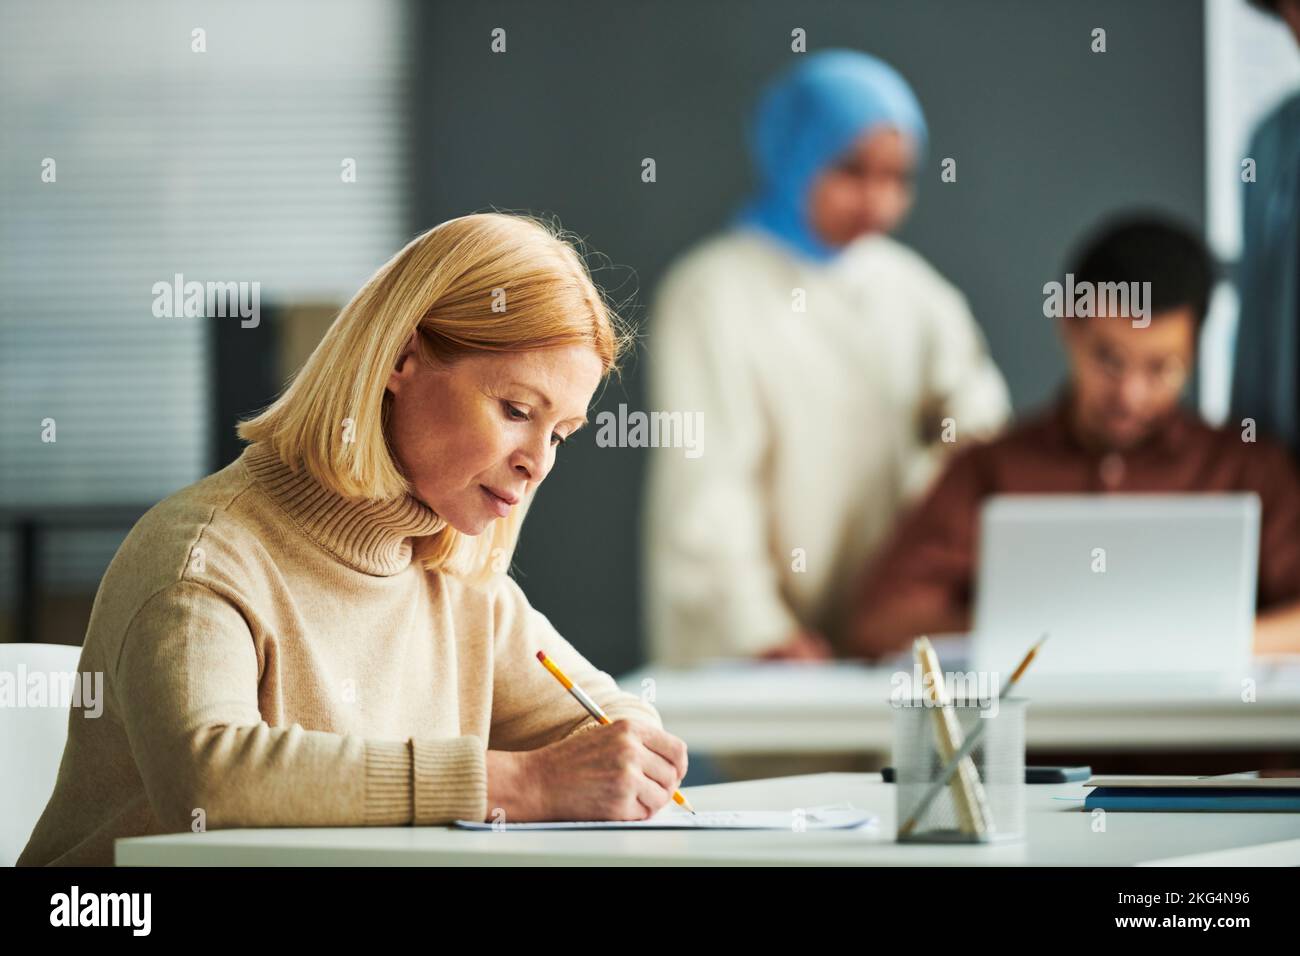 Serious mature blond teacher in beige pullover checking grammar test while sitting by desk in front of camera against two students Stock Photo